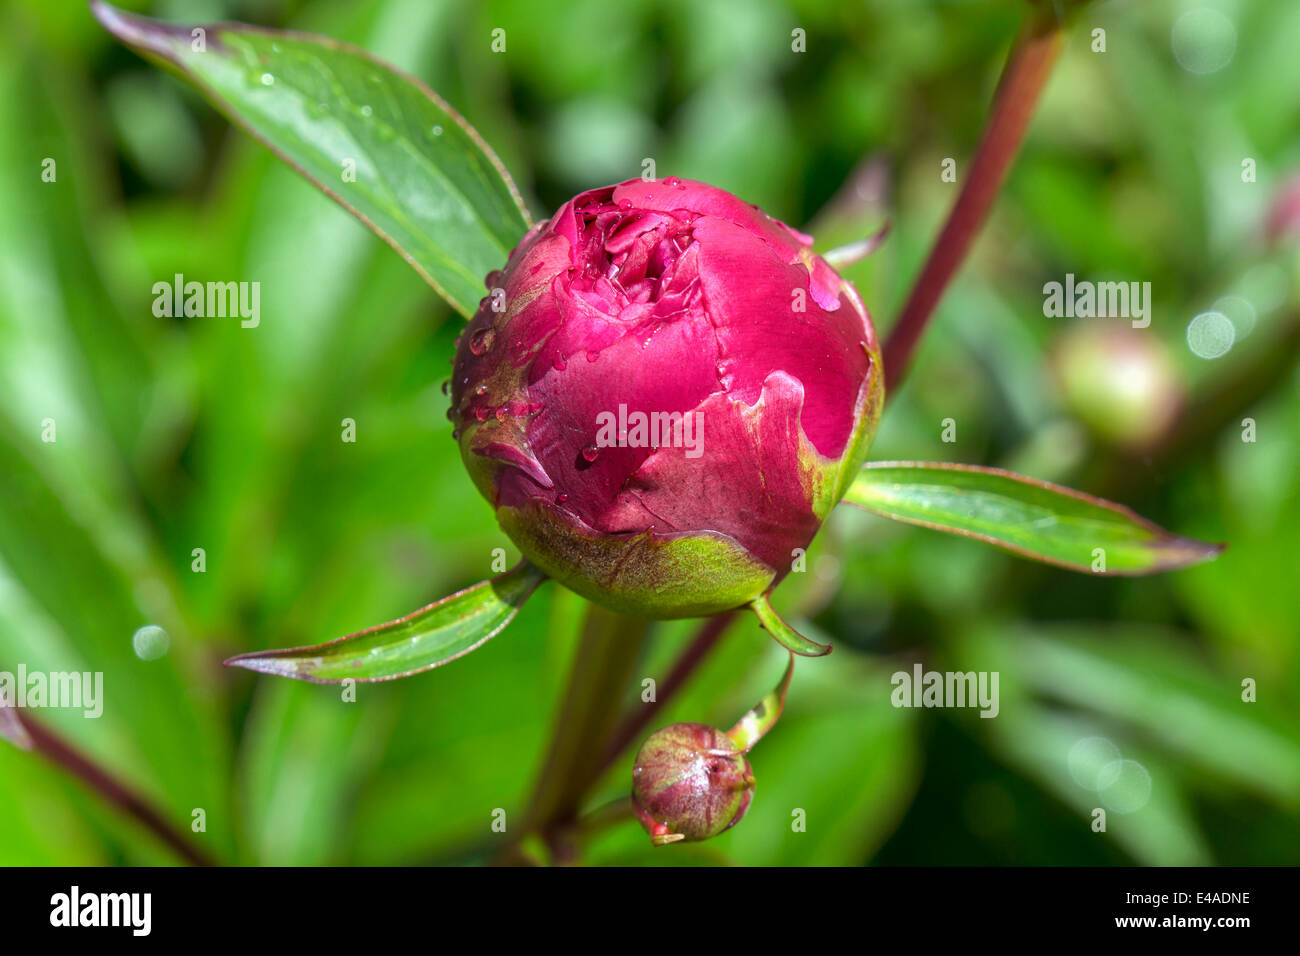 Dewdrops on bud of pink peony, Paeonia officinalis Stock Photo